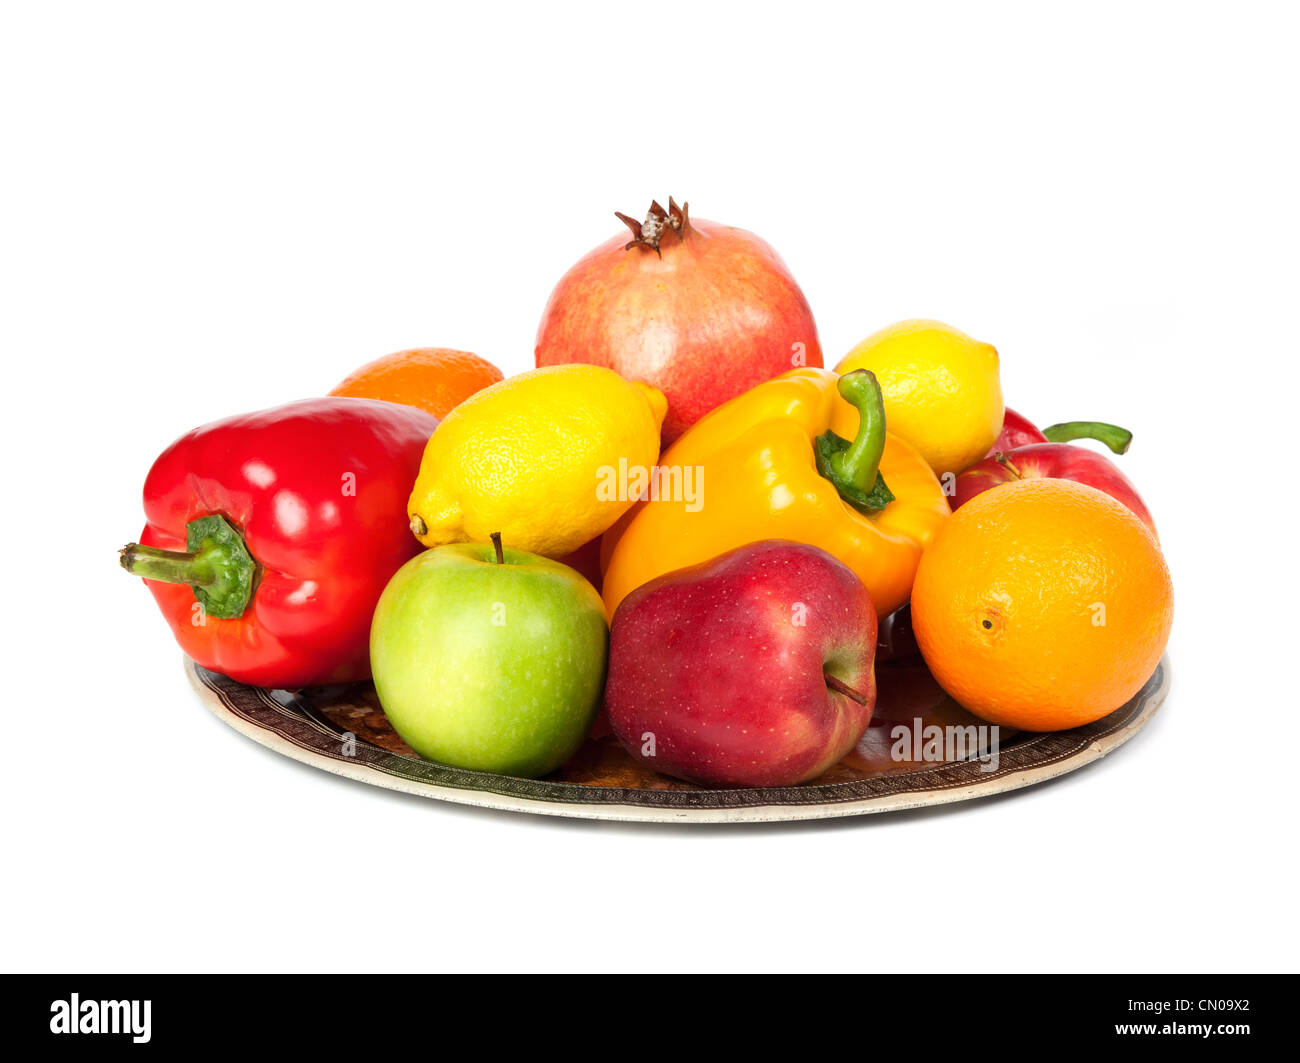 Fruits and vegetables against the white background. Stock Photo